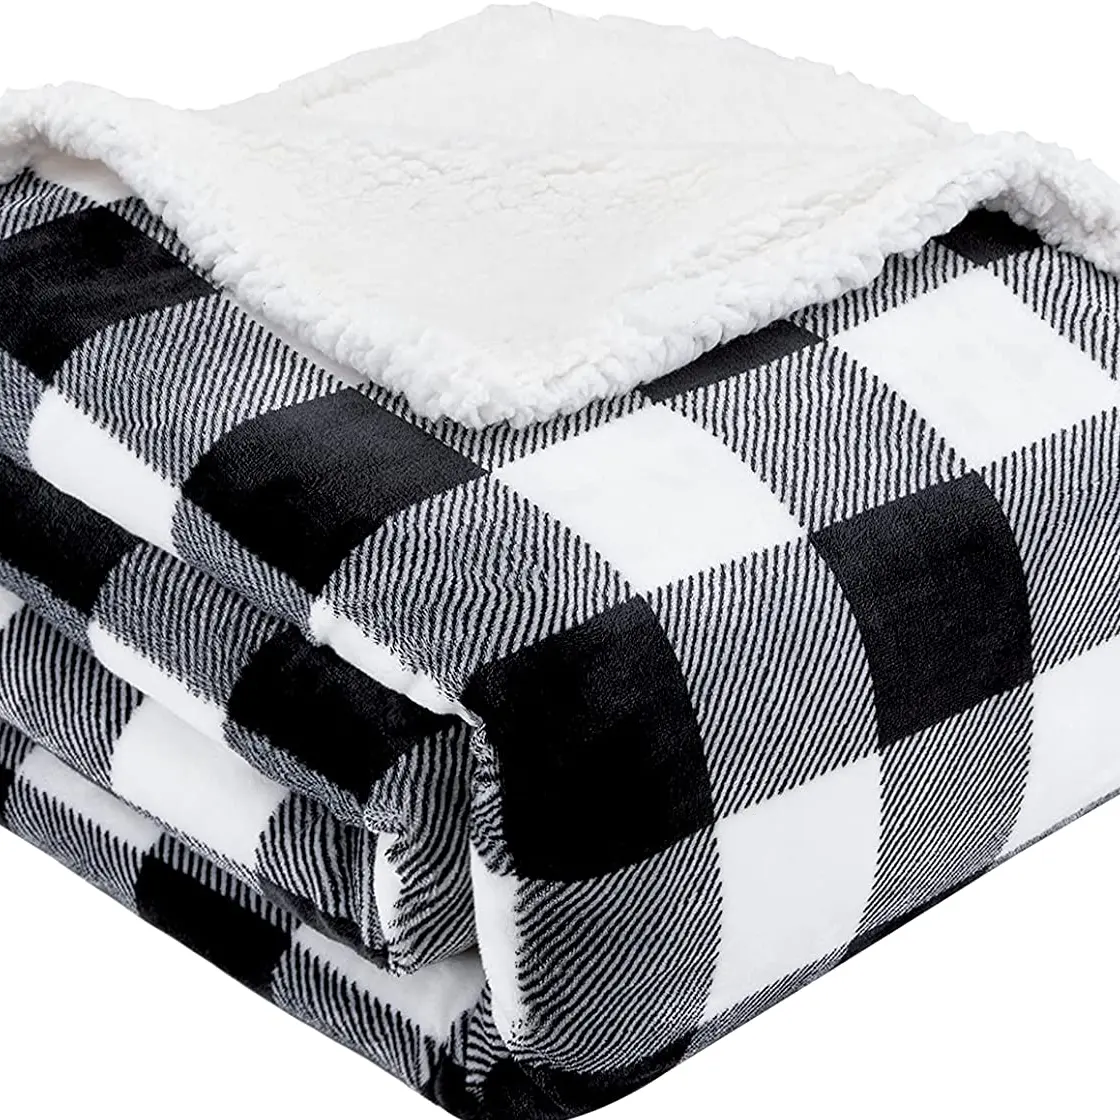 Plaid Blanket for Couch - Red and Black Checkered Blankets for Bed, Fleece Baby Blanket for Winter, Fuzzy Thick Warm Soft Throw